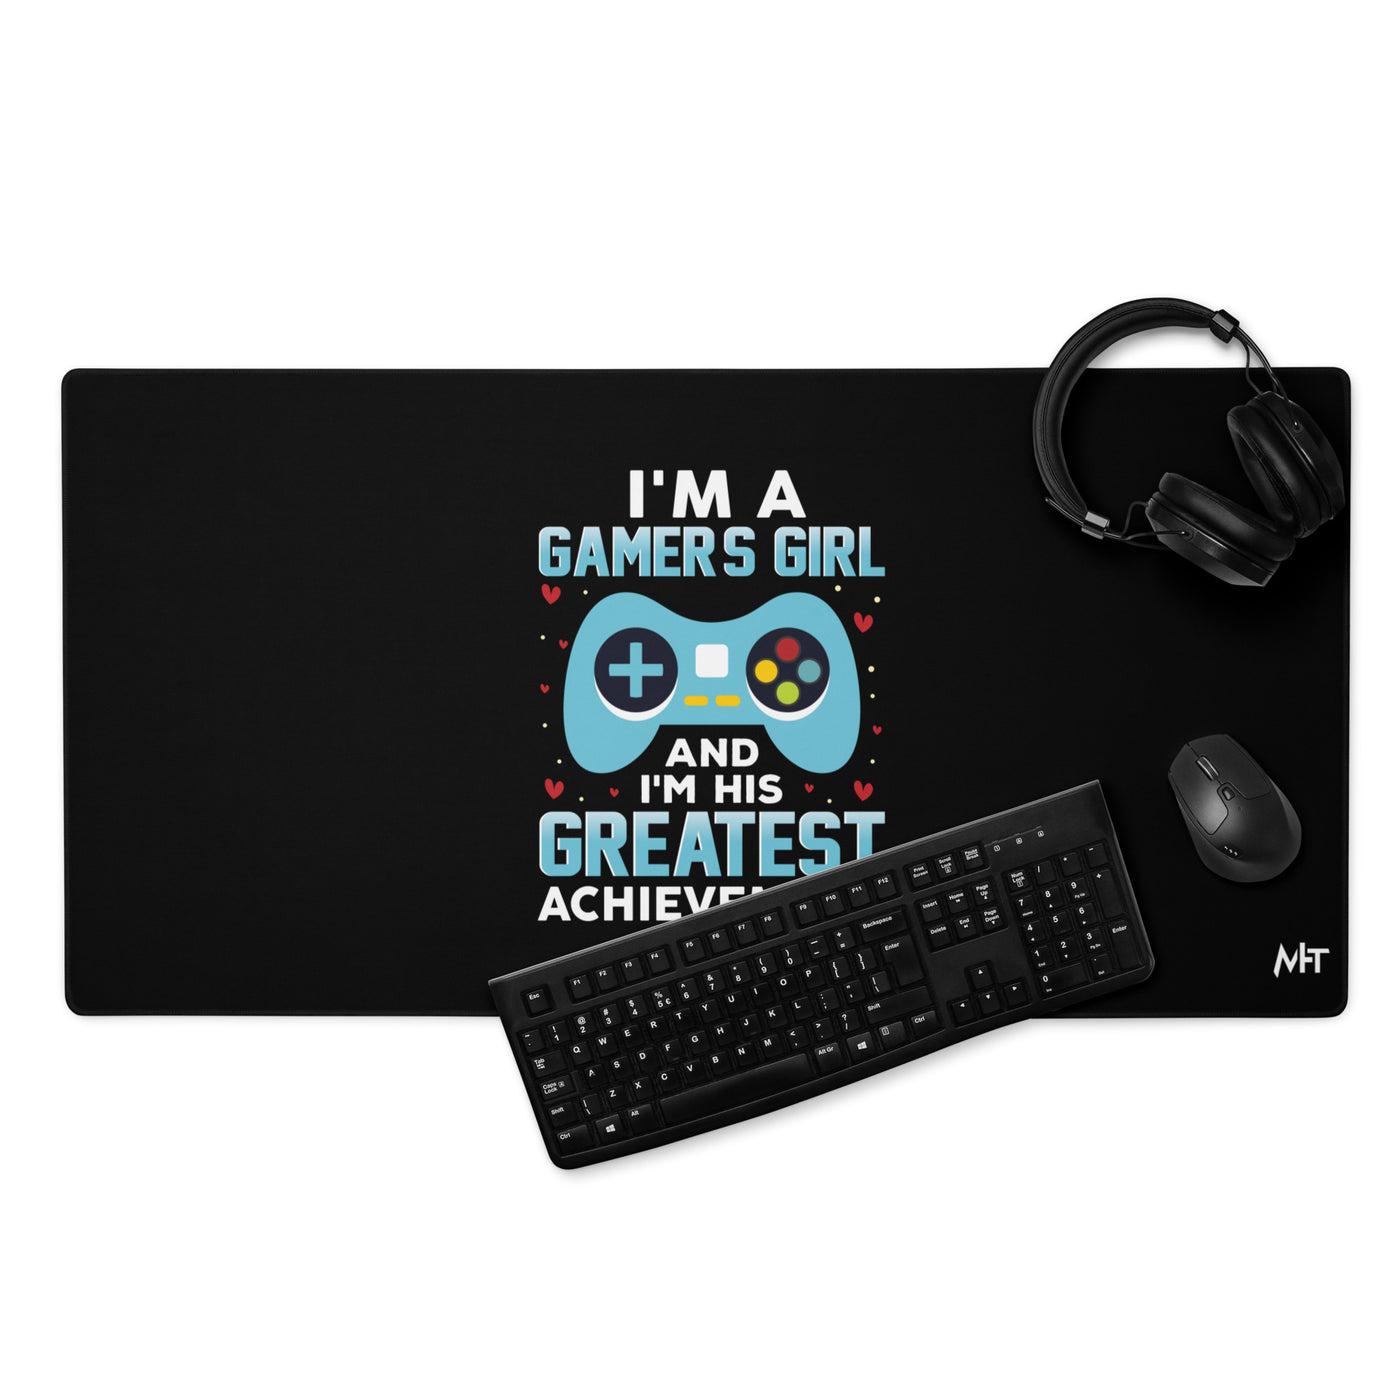 I am a Gamer's Girl, I am his Greatest Achievement (turquoise text ) - Desk Mat